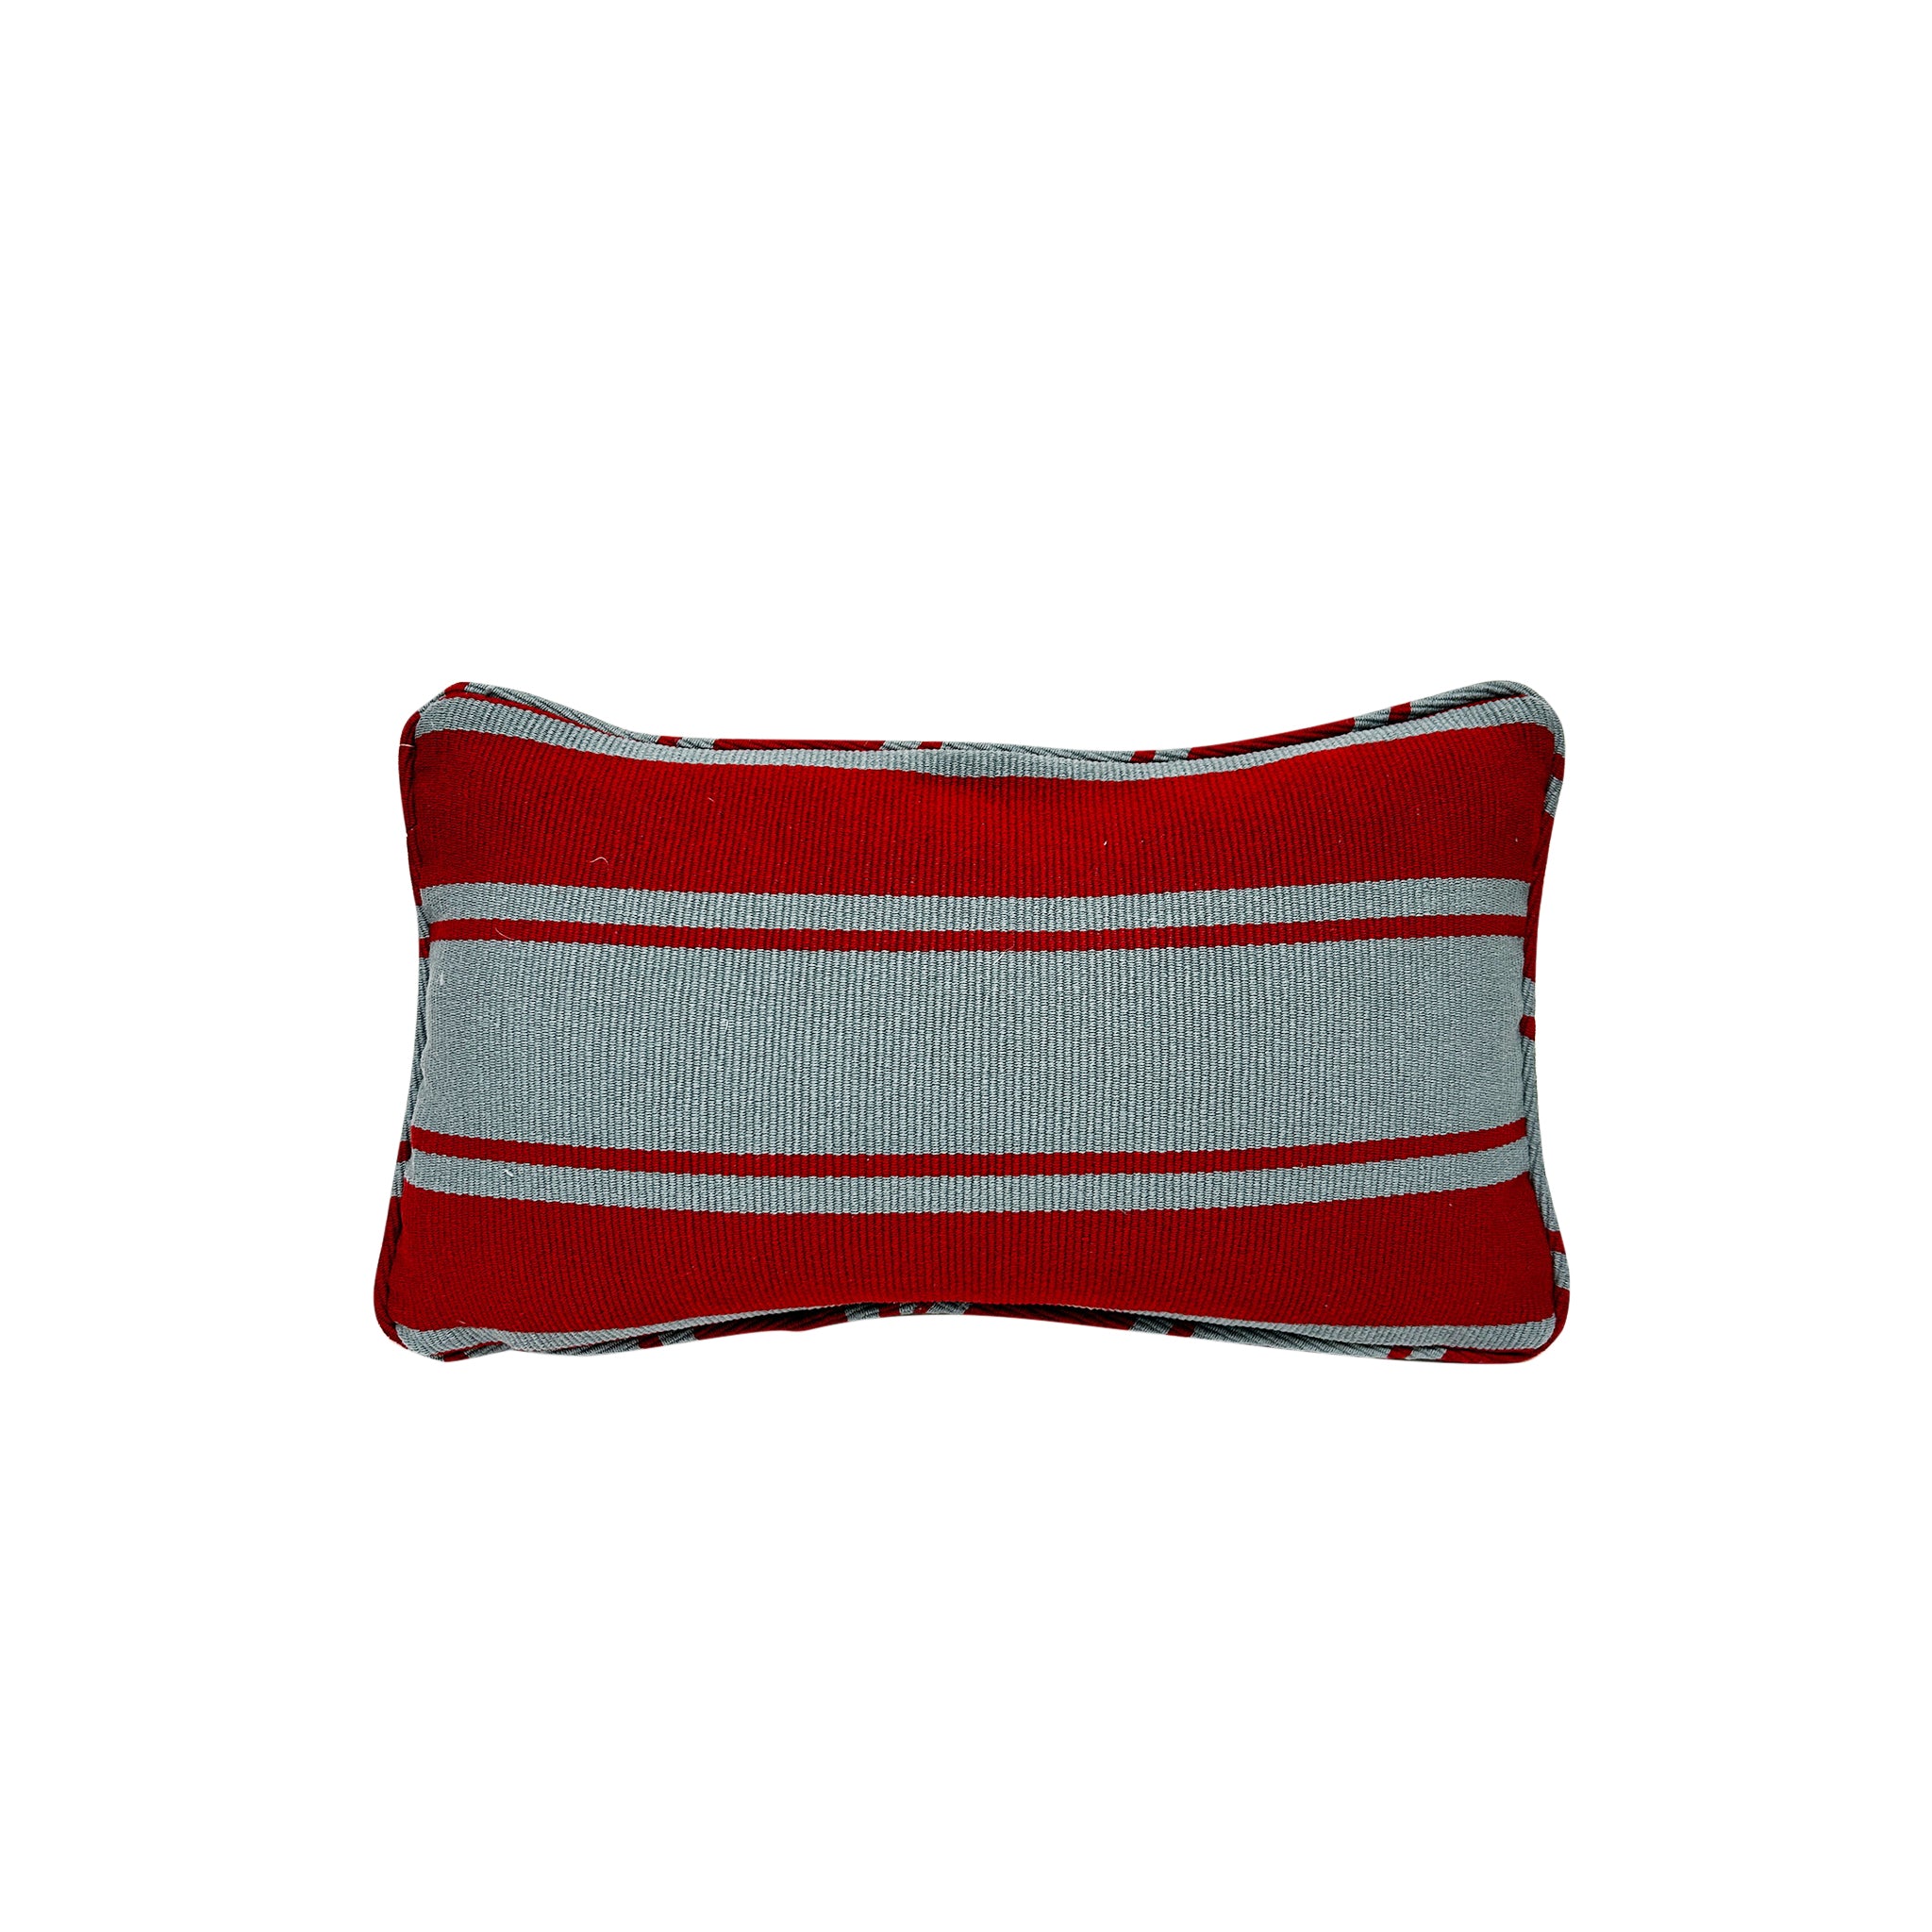 Tangier Stripe in Teal & Red Pillow